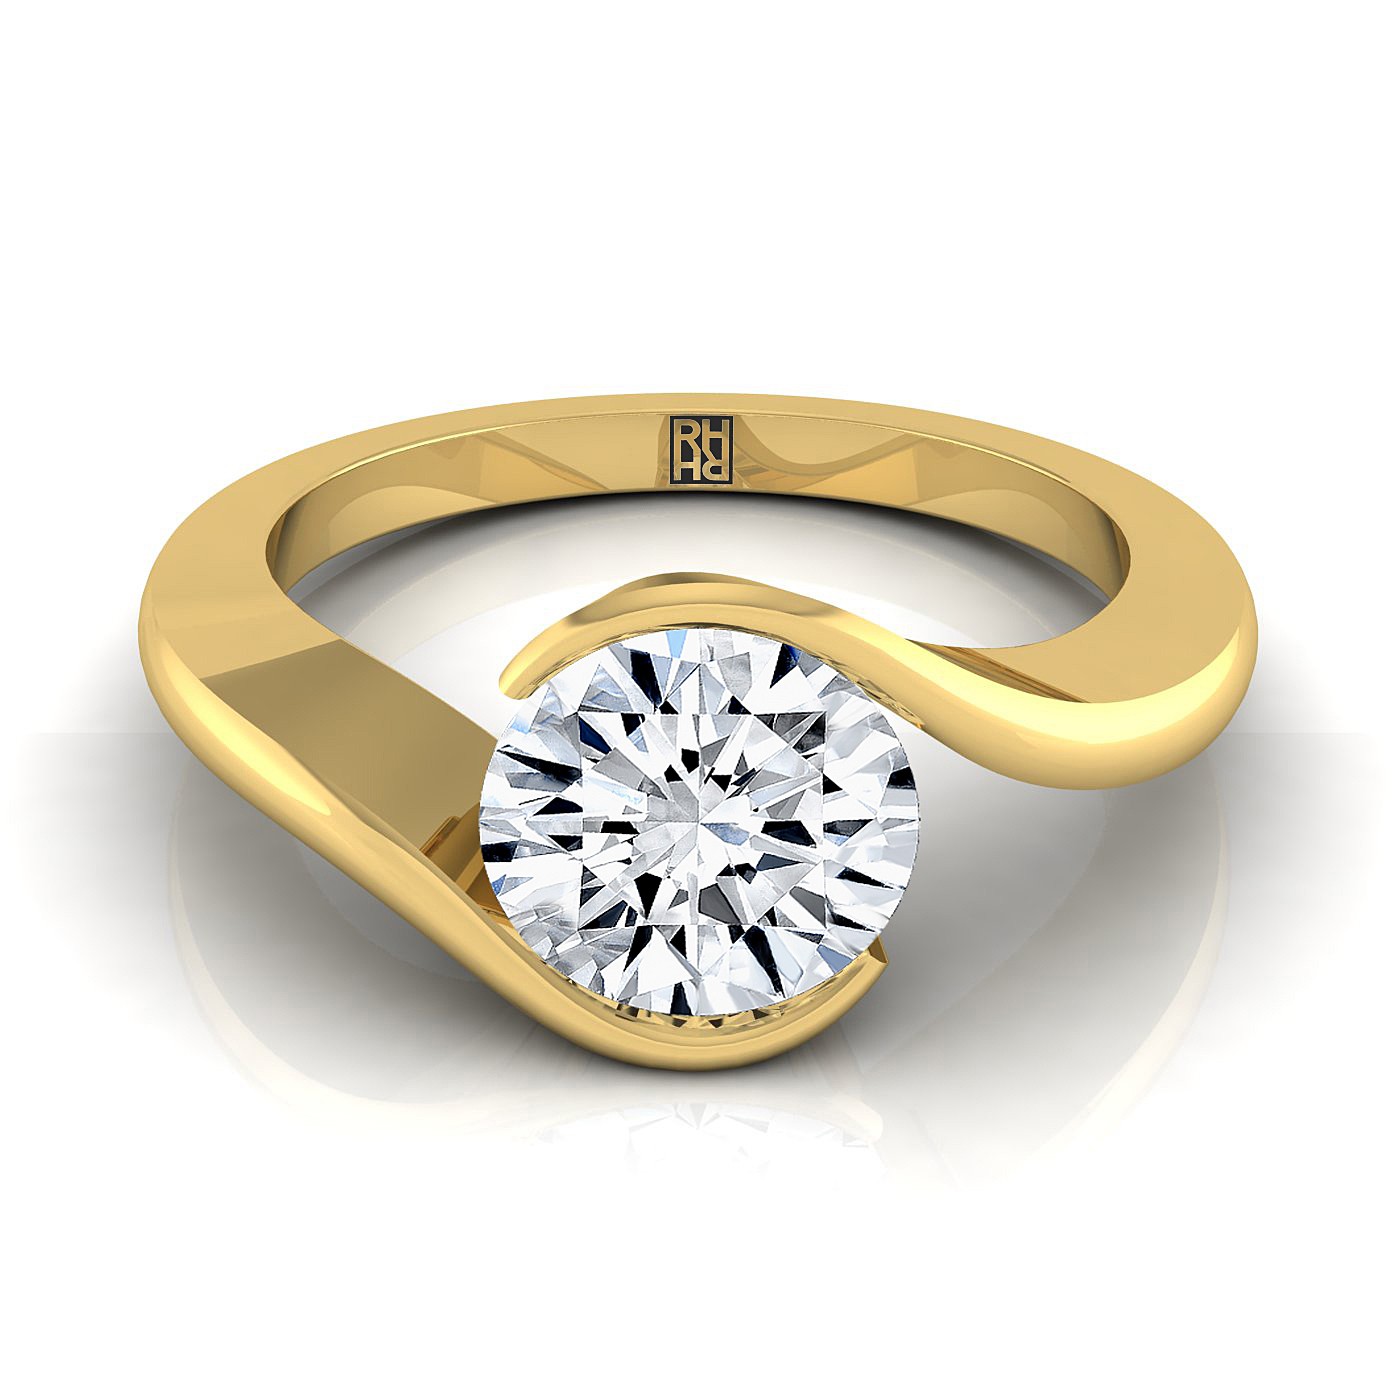 Best Engagement Ring Designs Based on Your Career